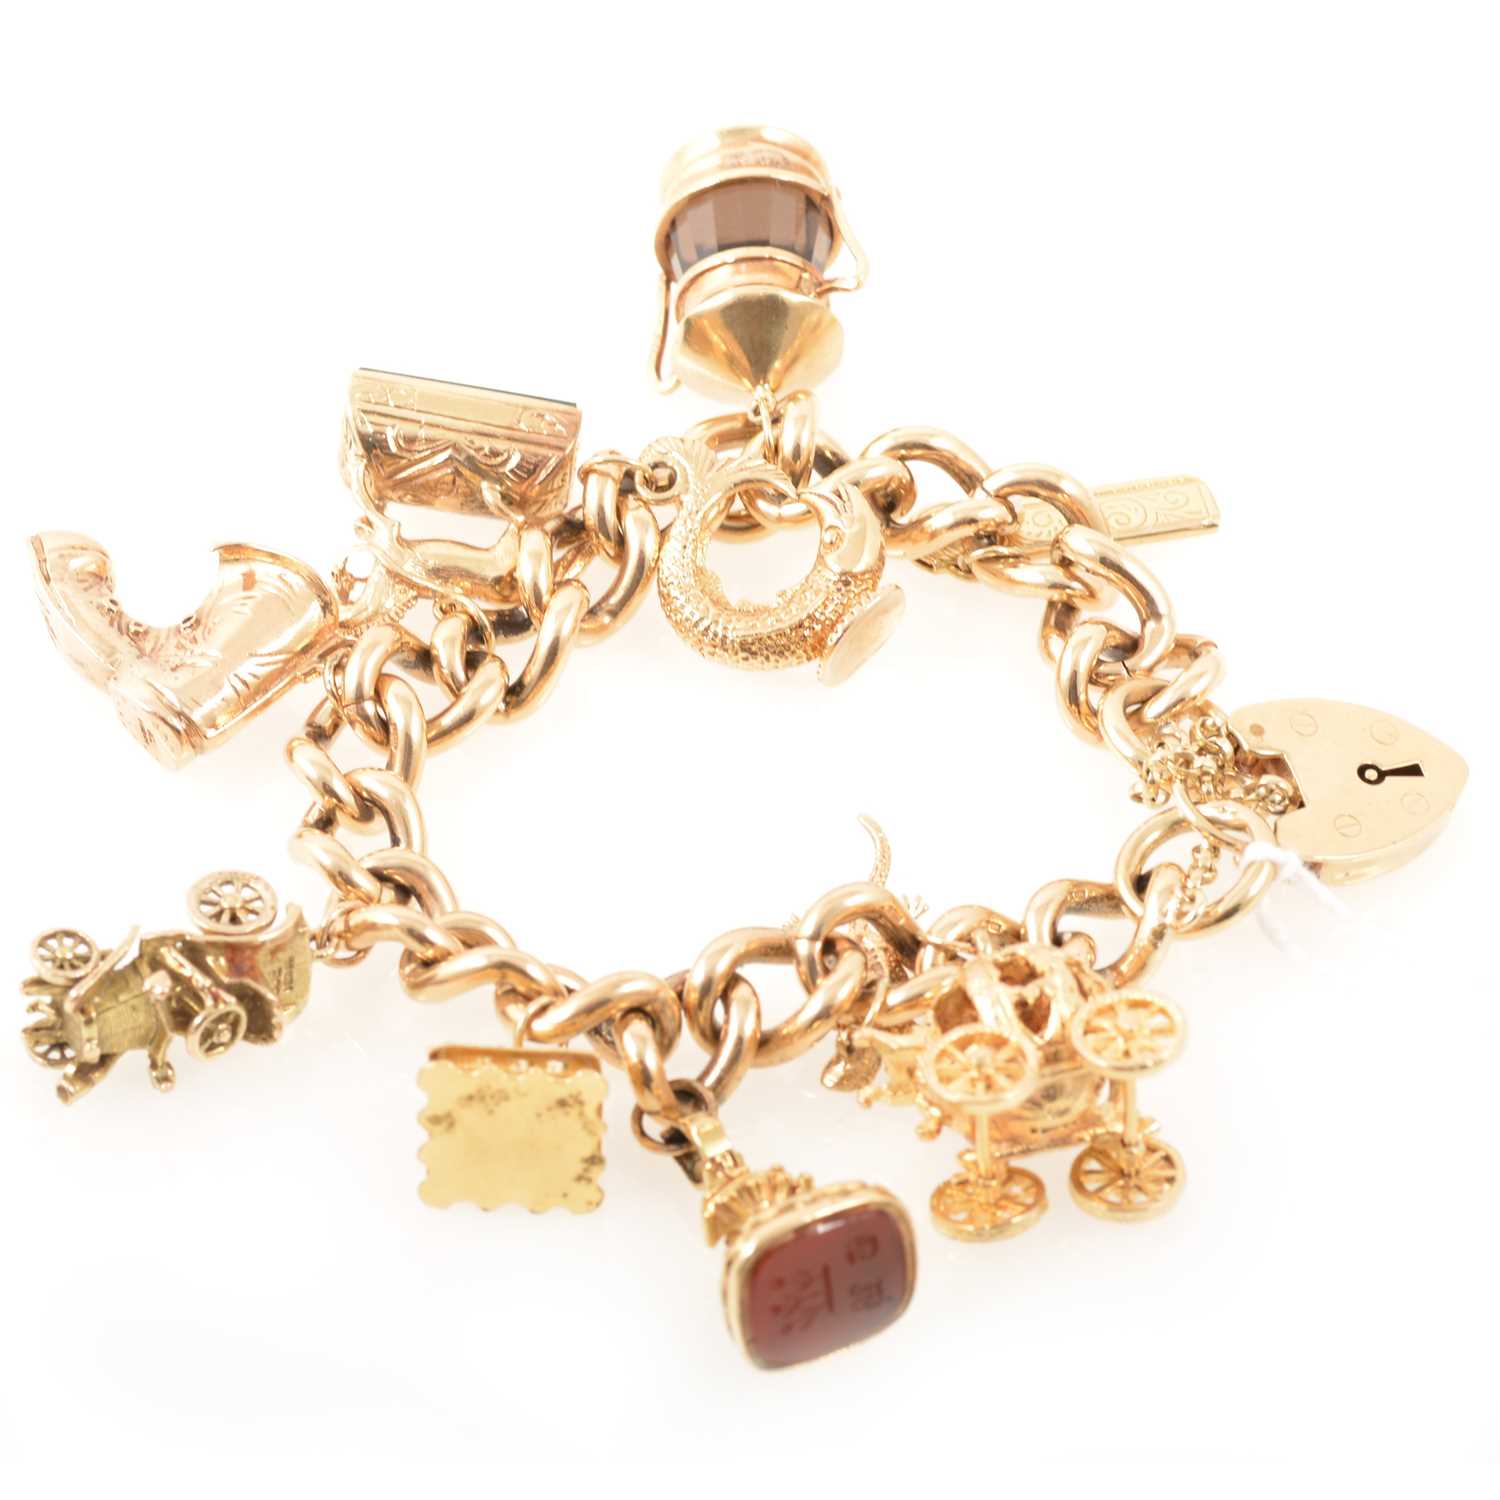 Lot 204 - Heavy 9 carat gold charm bracelet with ten charms including two seals.